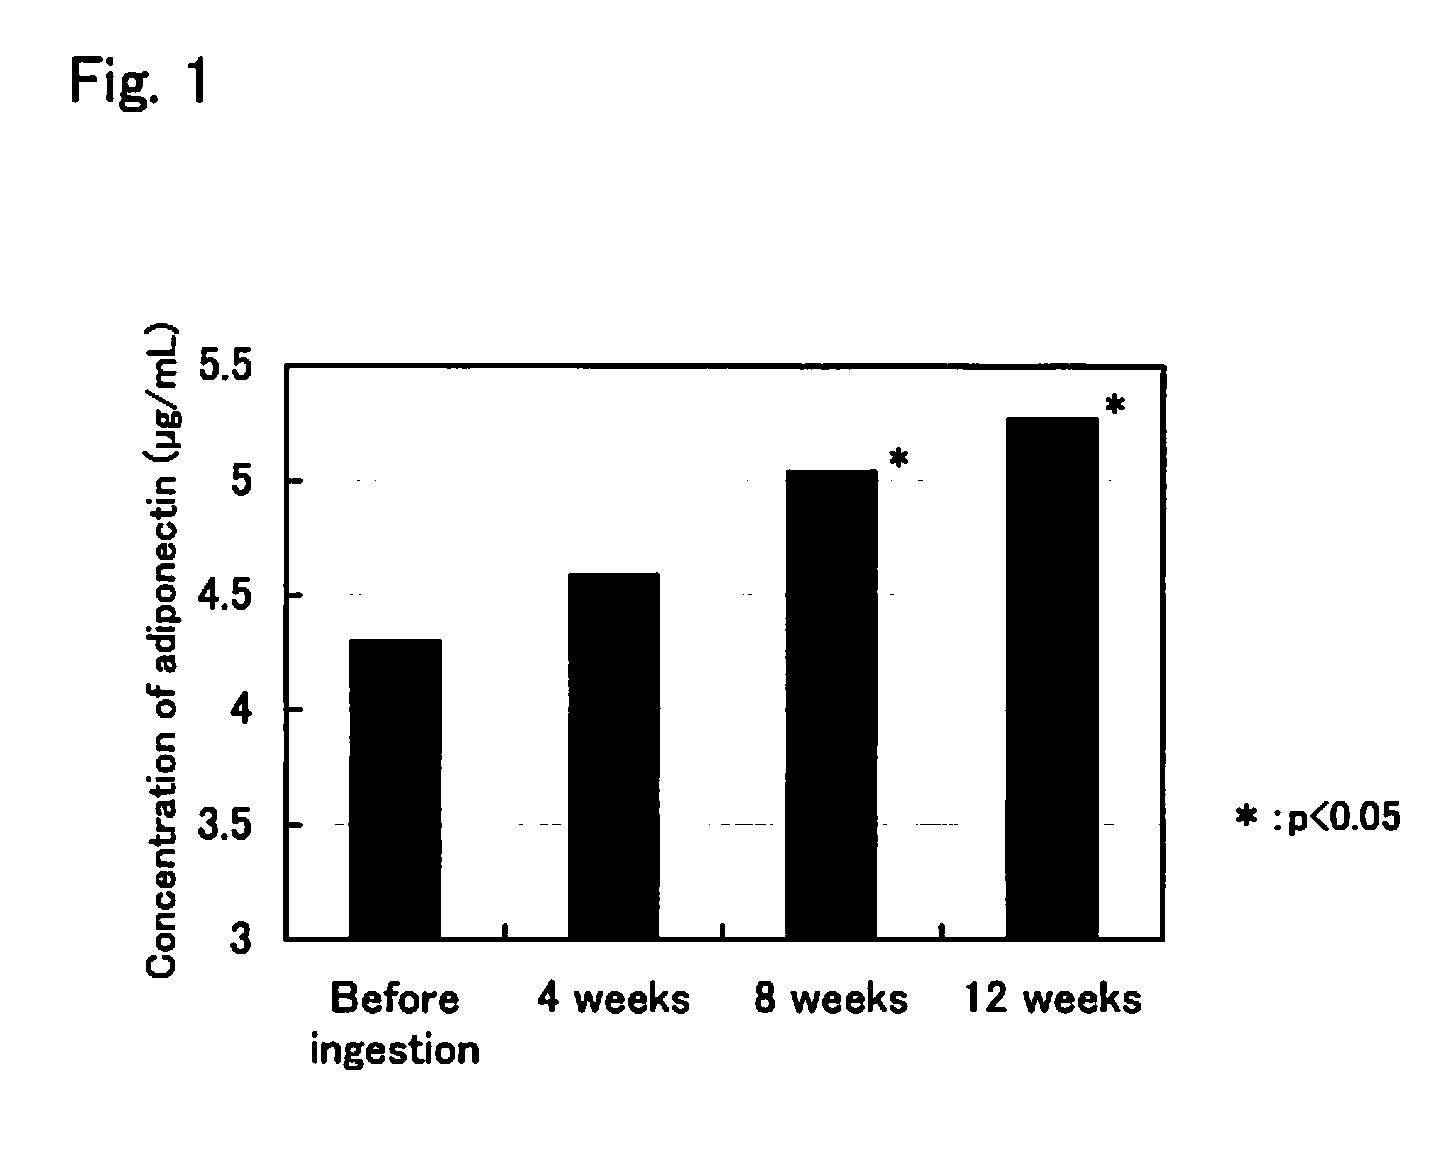 Agent for increasing adiponectin in blood